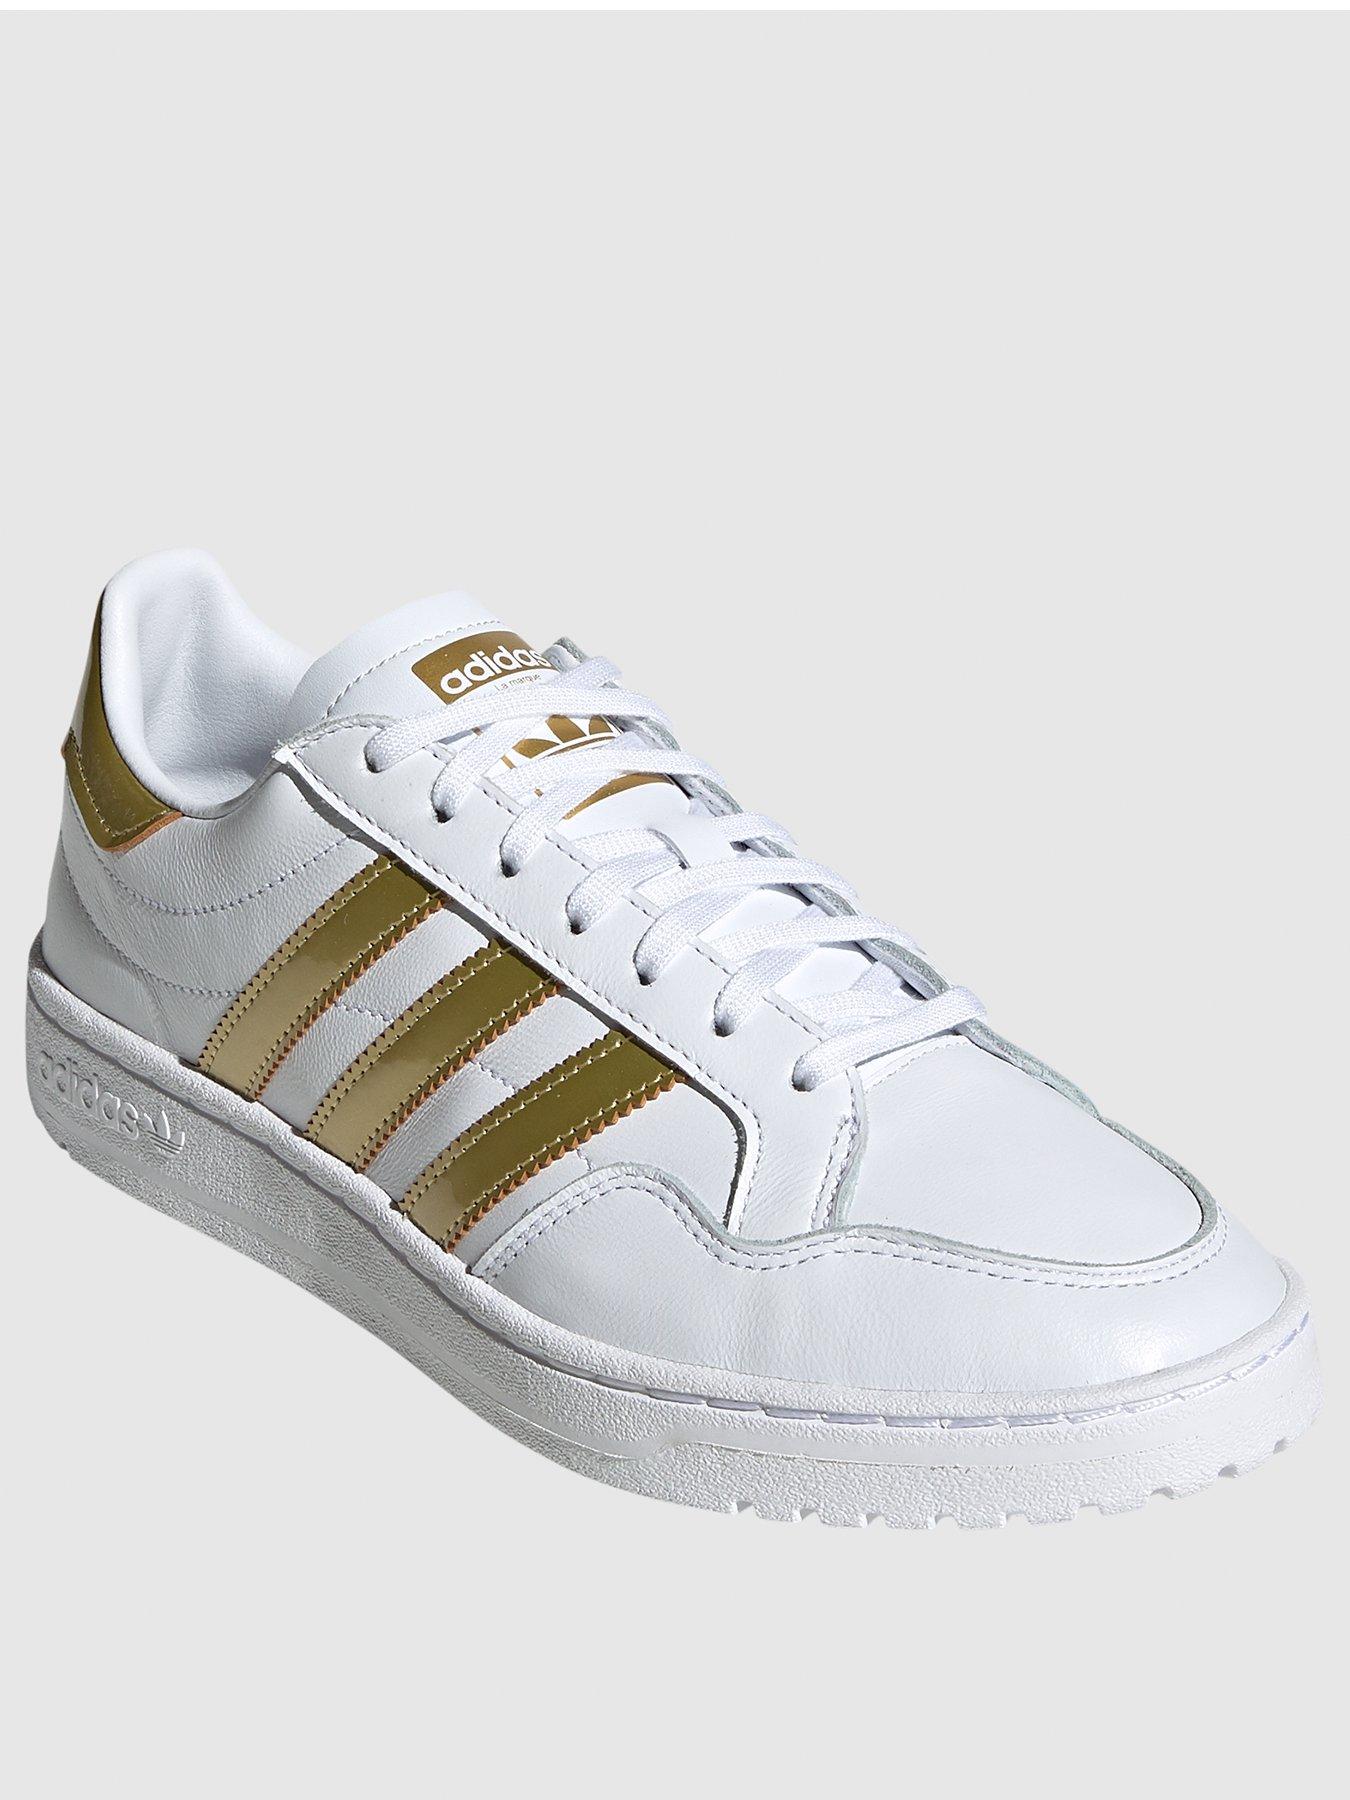 adidas white gold shoes